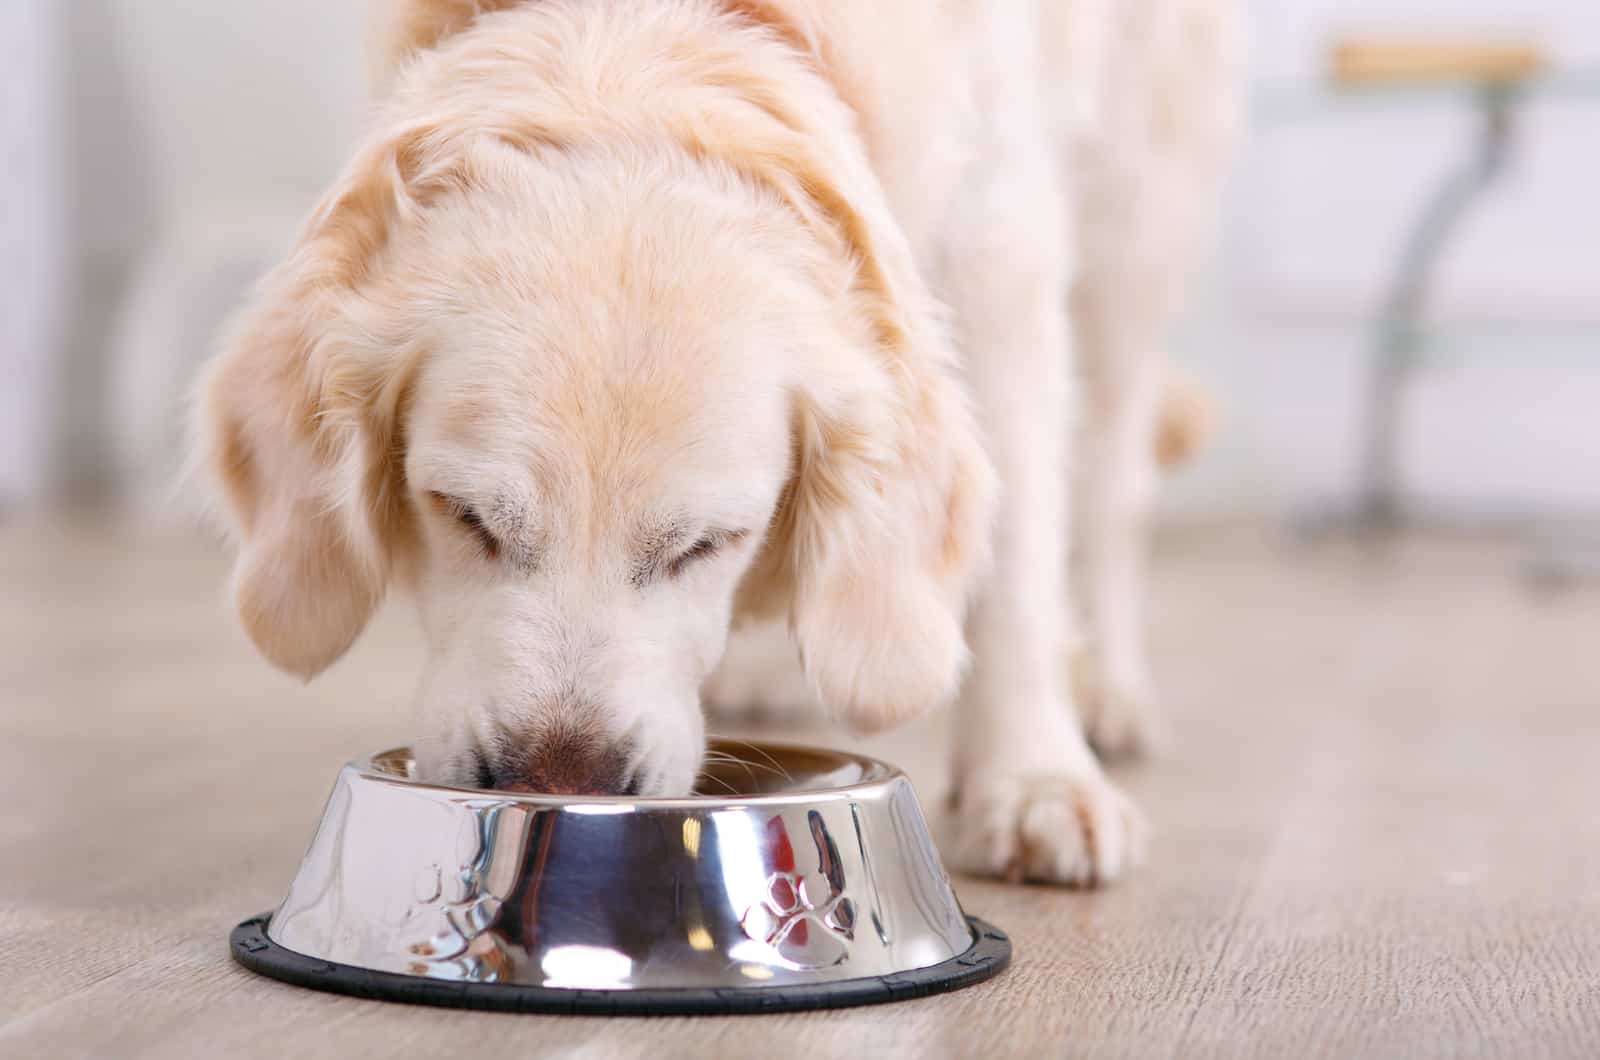 My Puppy Is Always Hungry: 5 Reasons For This & How To Help